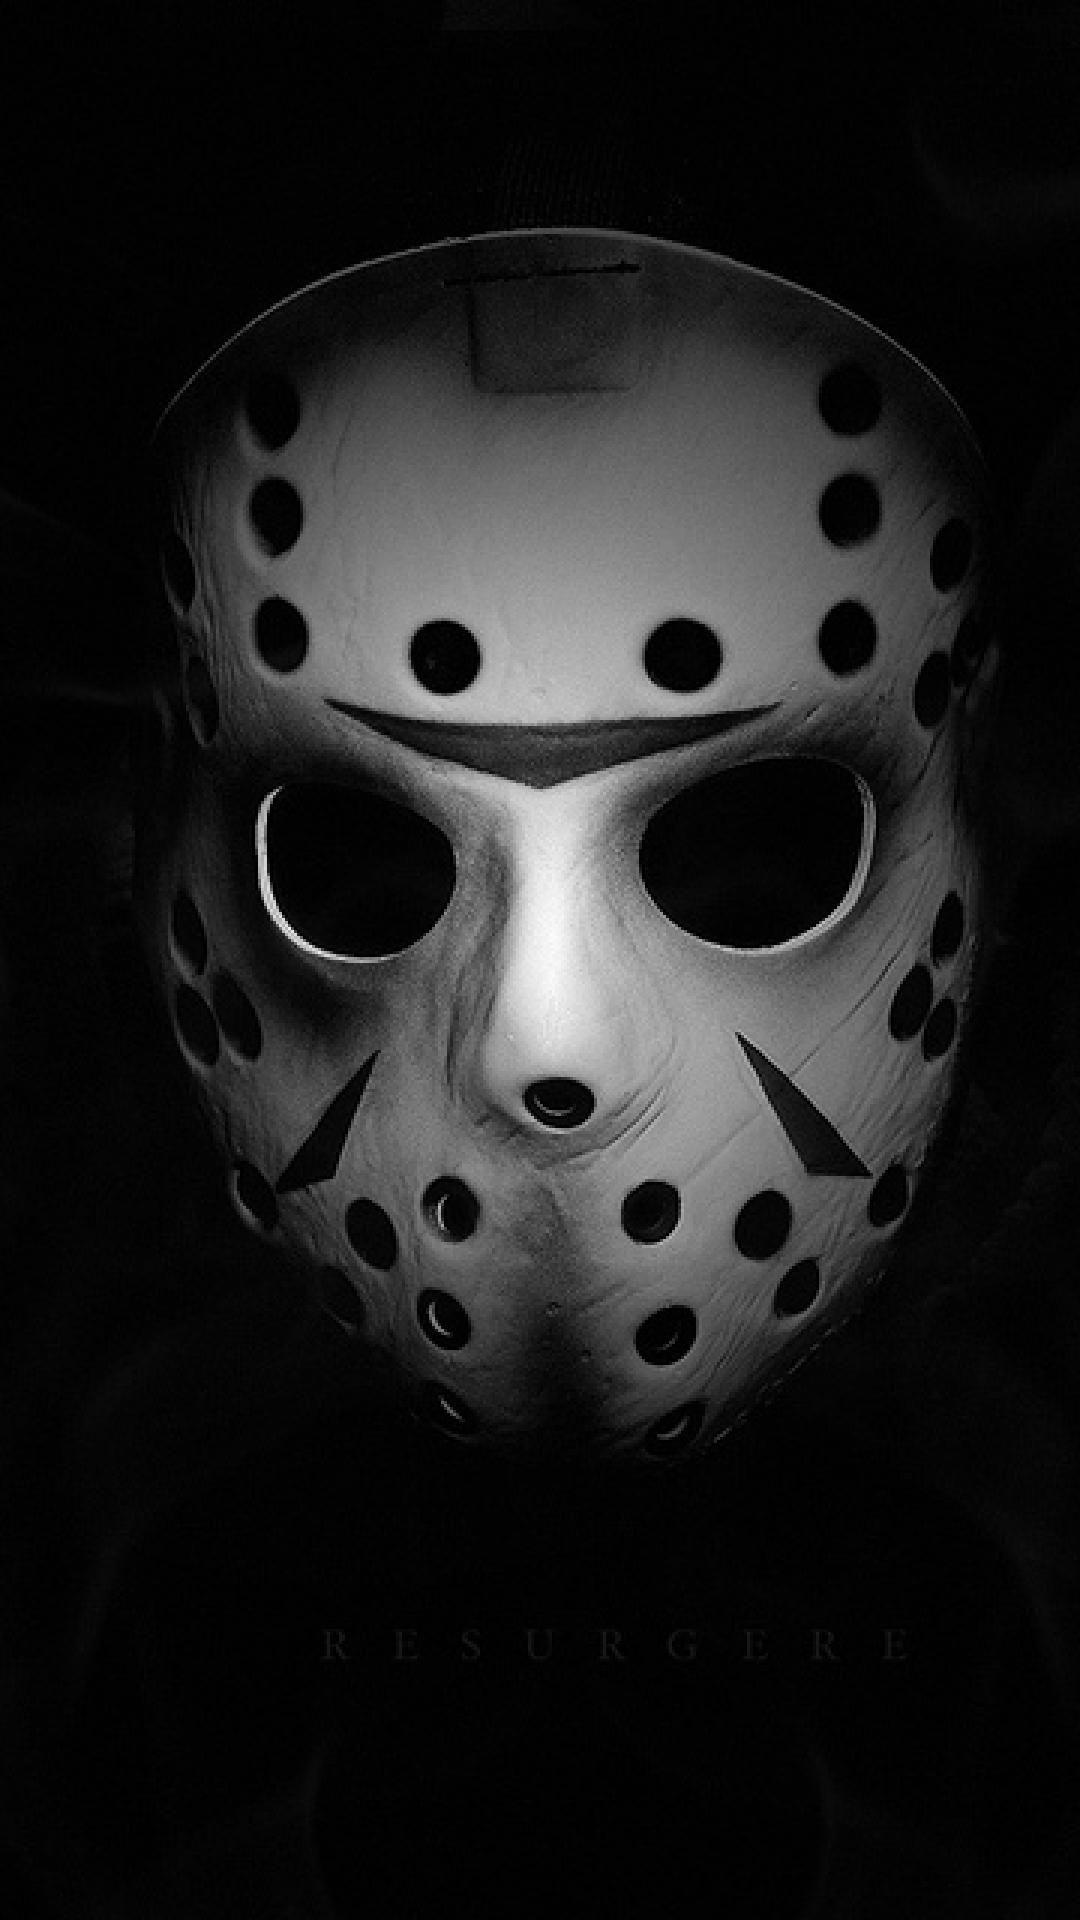 Jason Voorhees Image Friday The 13th HD Wallpaper And Background